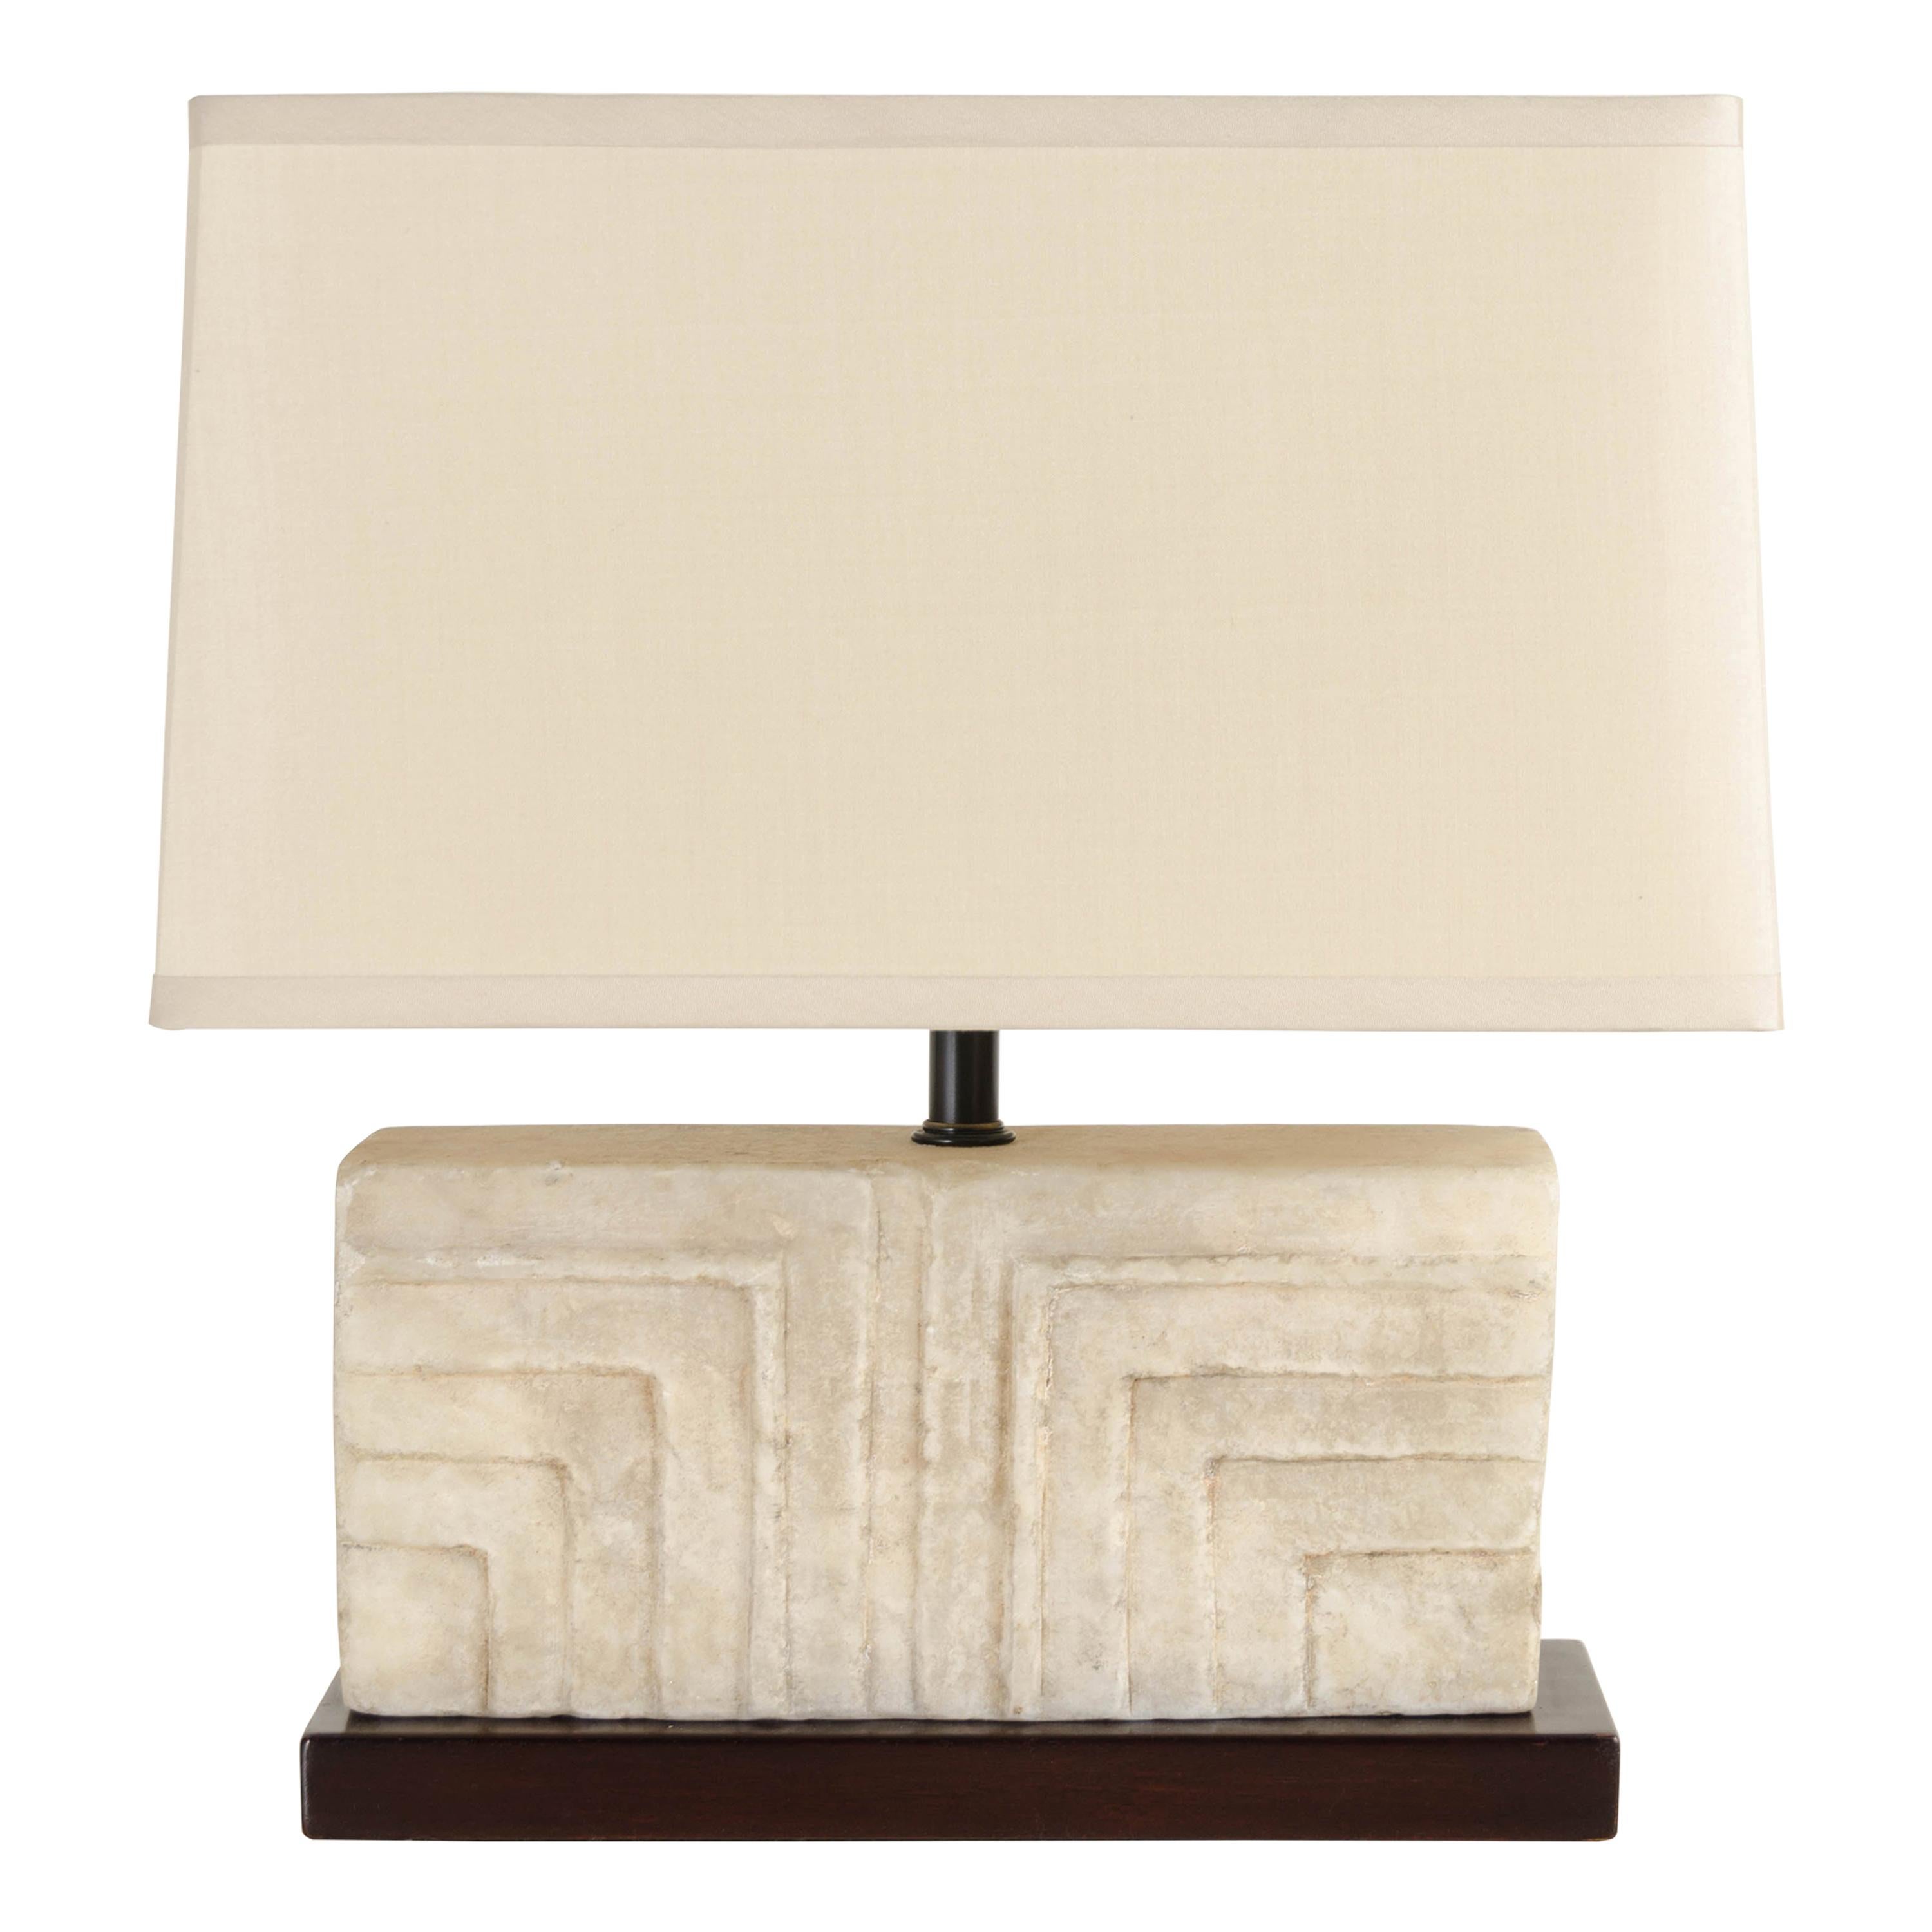 Stone Raised Corner Lamp with Shade in Han Bai Yu by Robert Kuo, Limited Edition For Sale